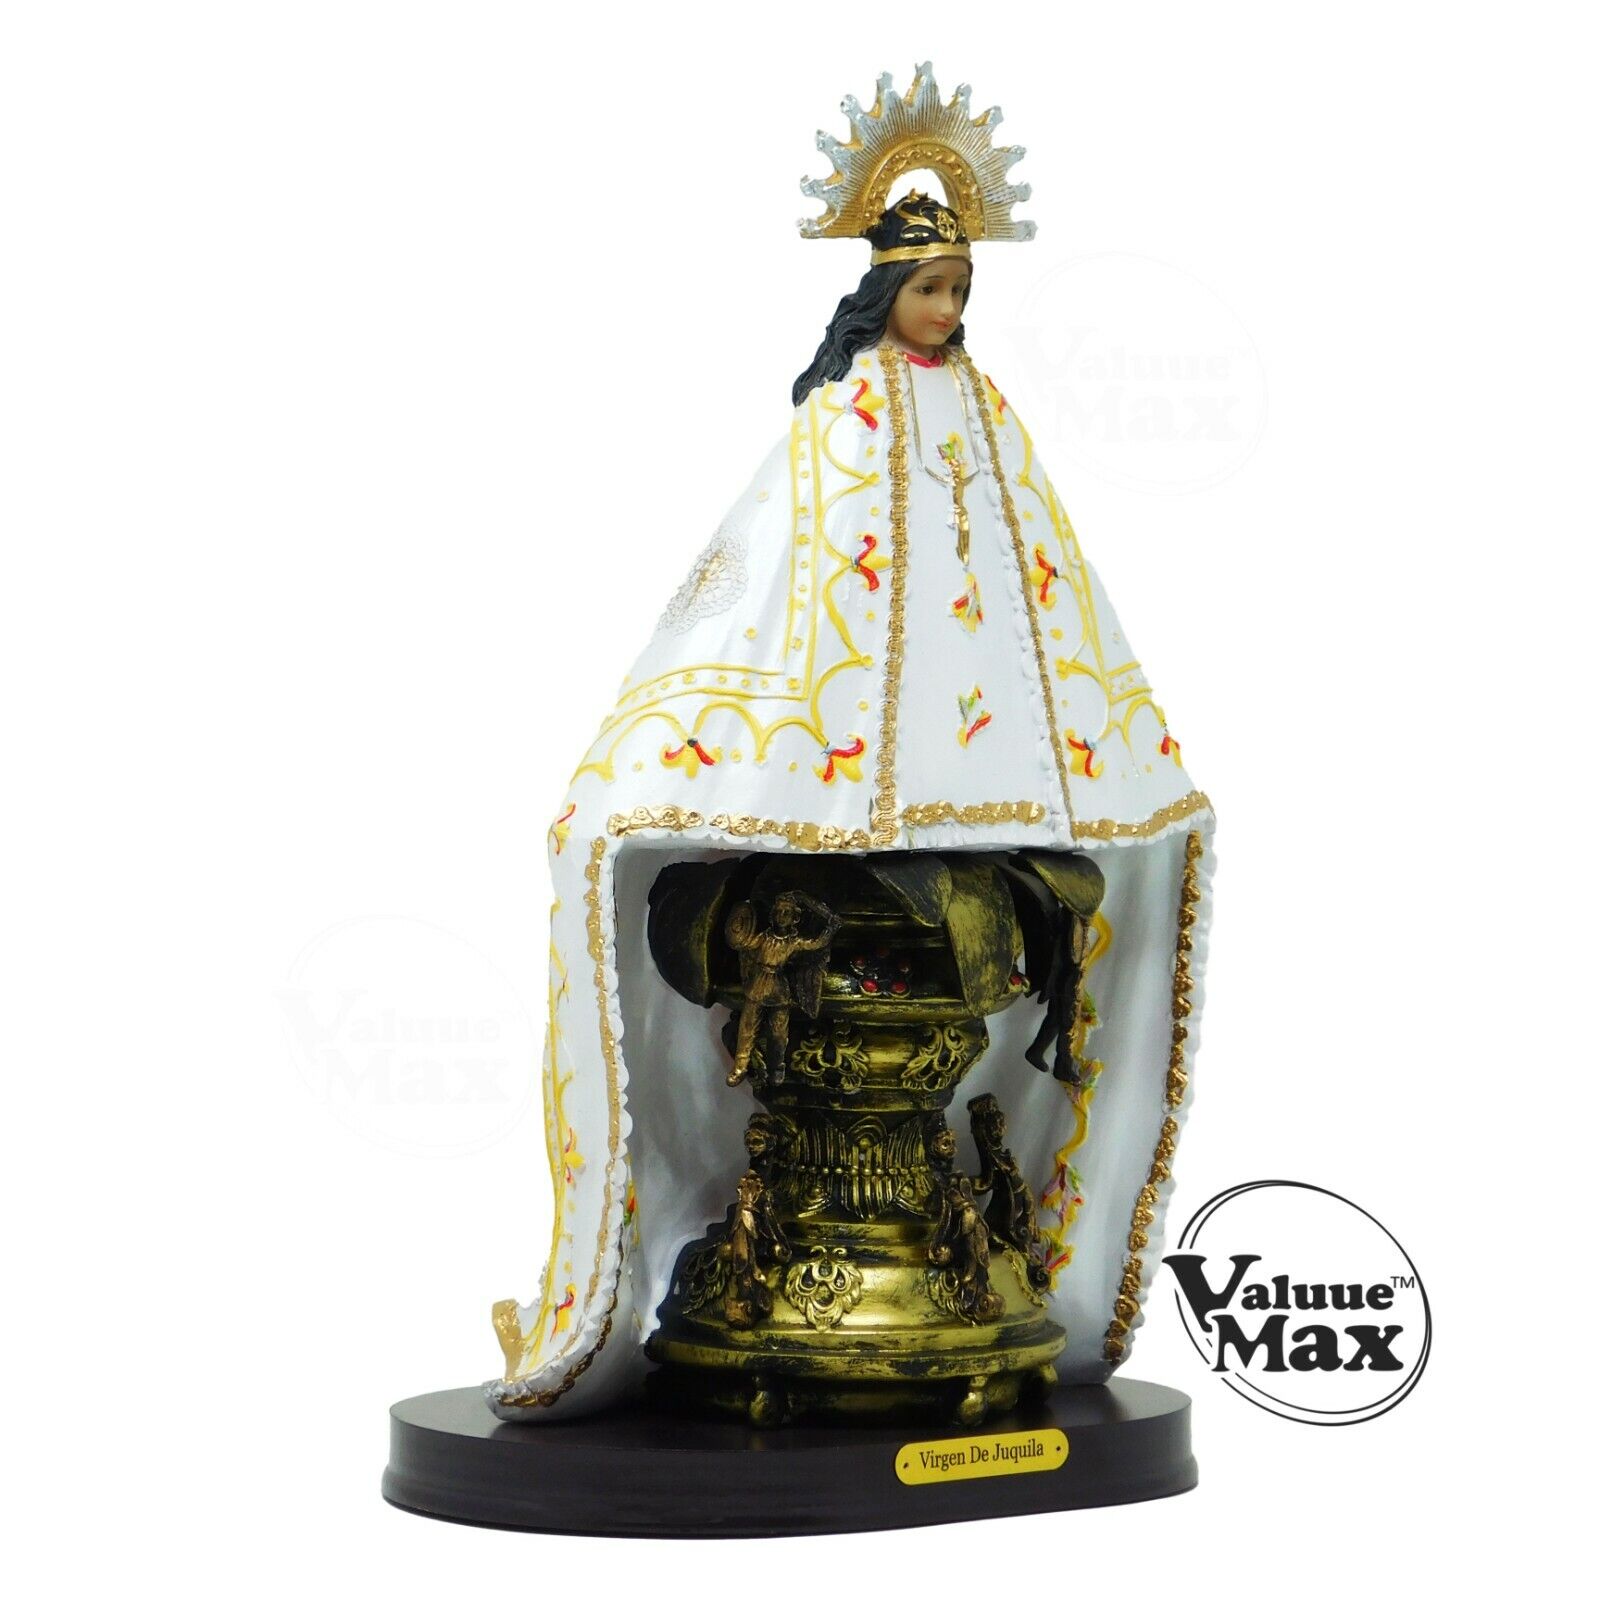 ValuueMax™ Our Lady of Juquila Statue, Finely Detailed Resin, 12 Inch Tall  